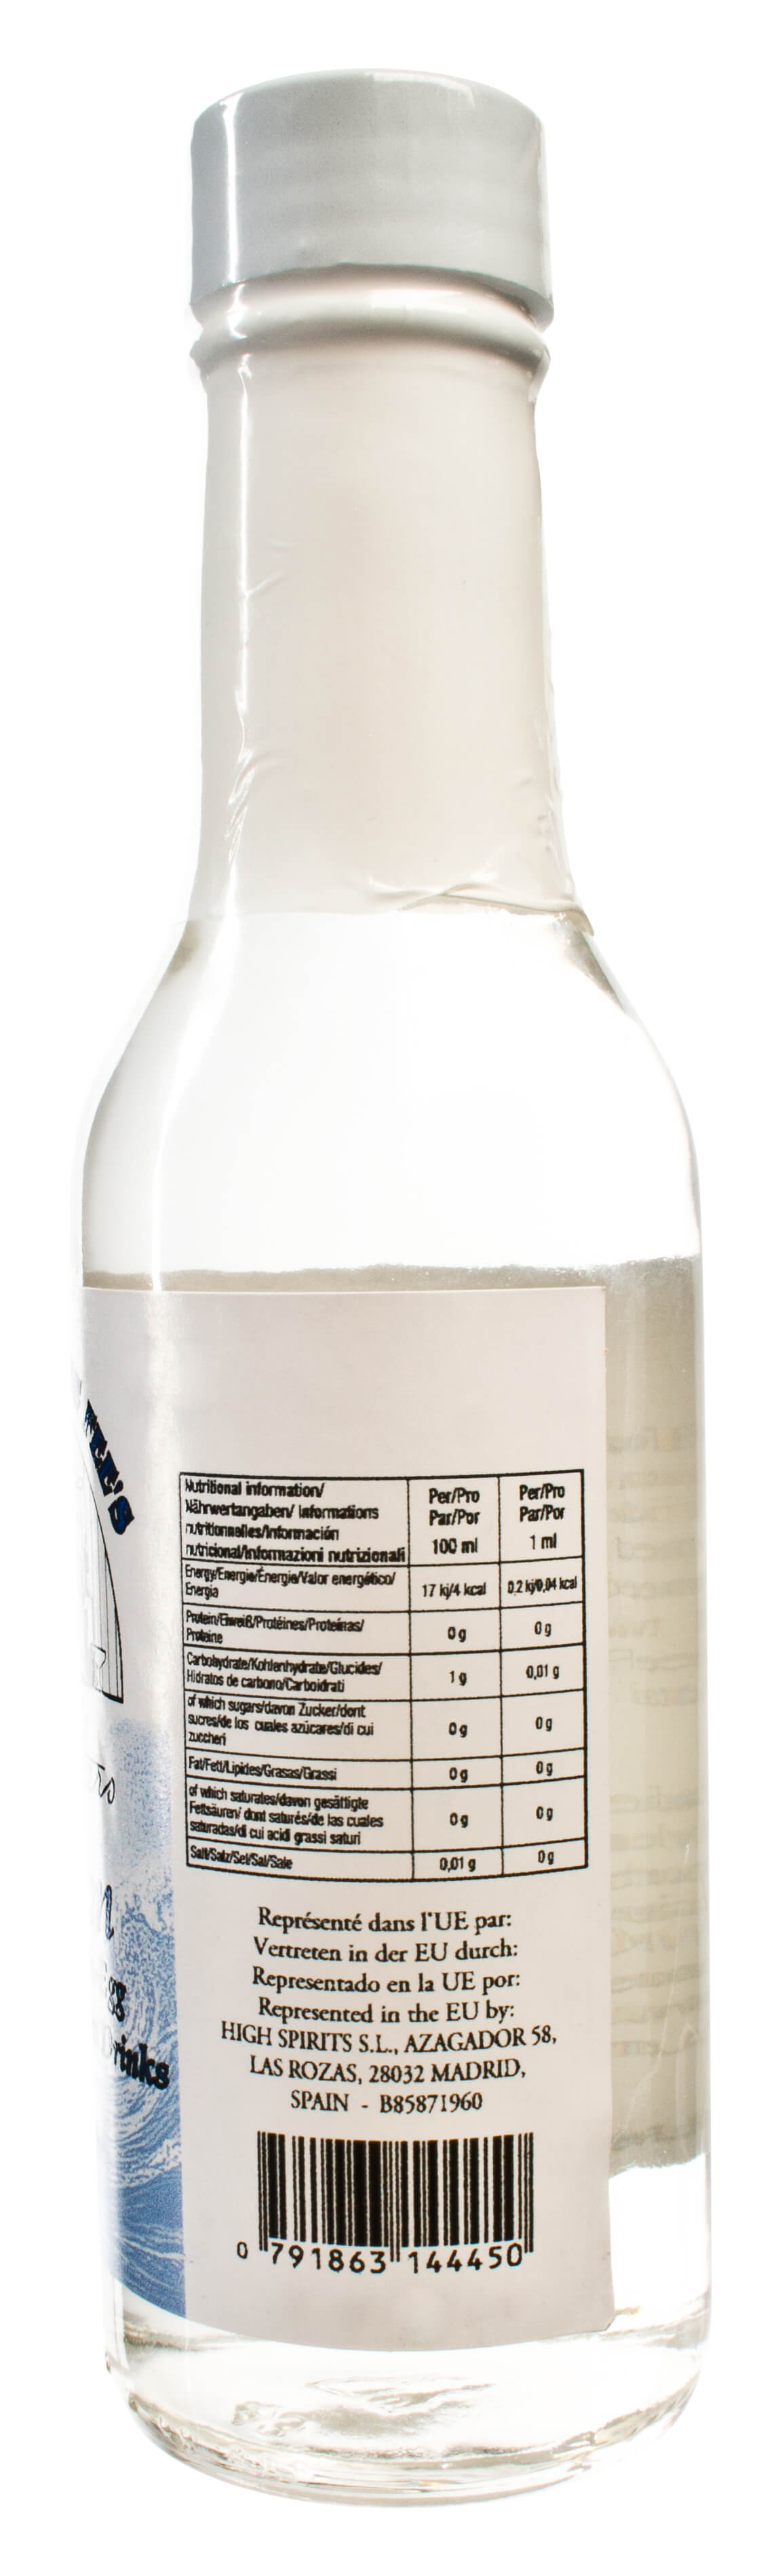 Liquid protein replacement 'Fee Foam' by Fee Brothers - 150ml bottle